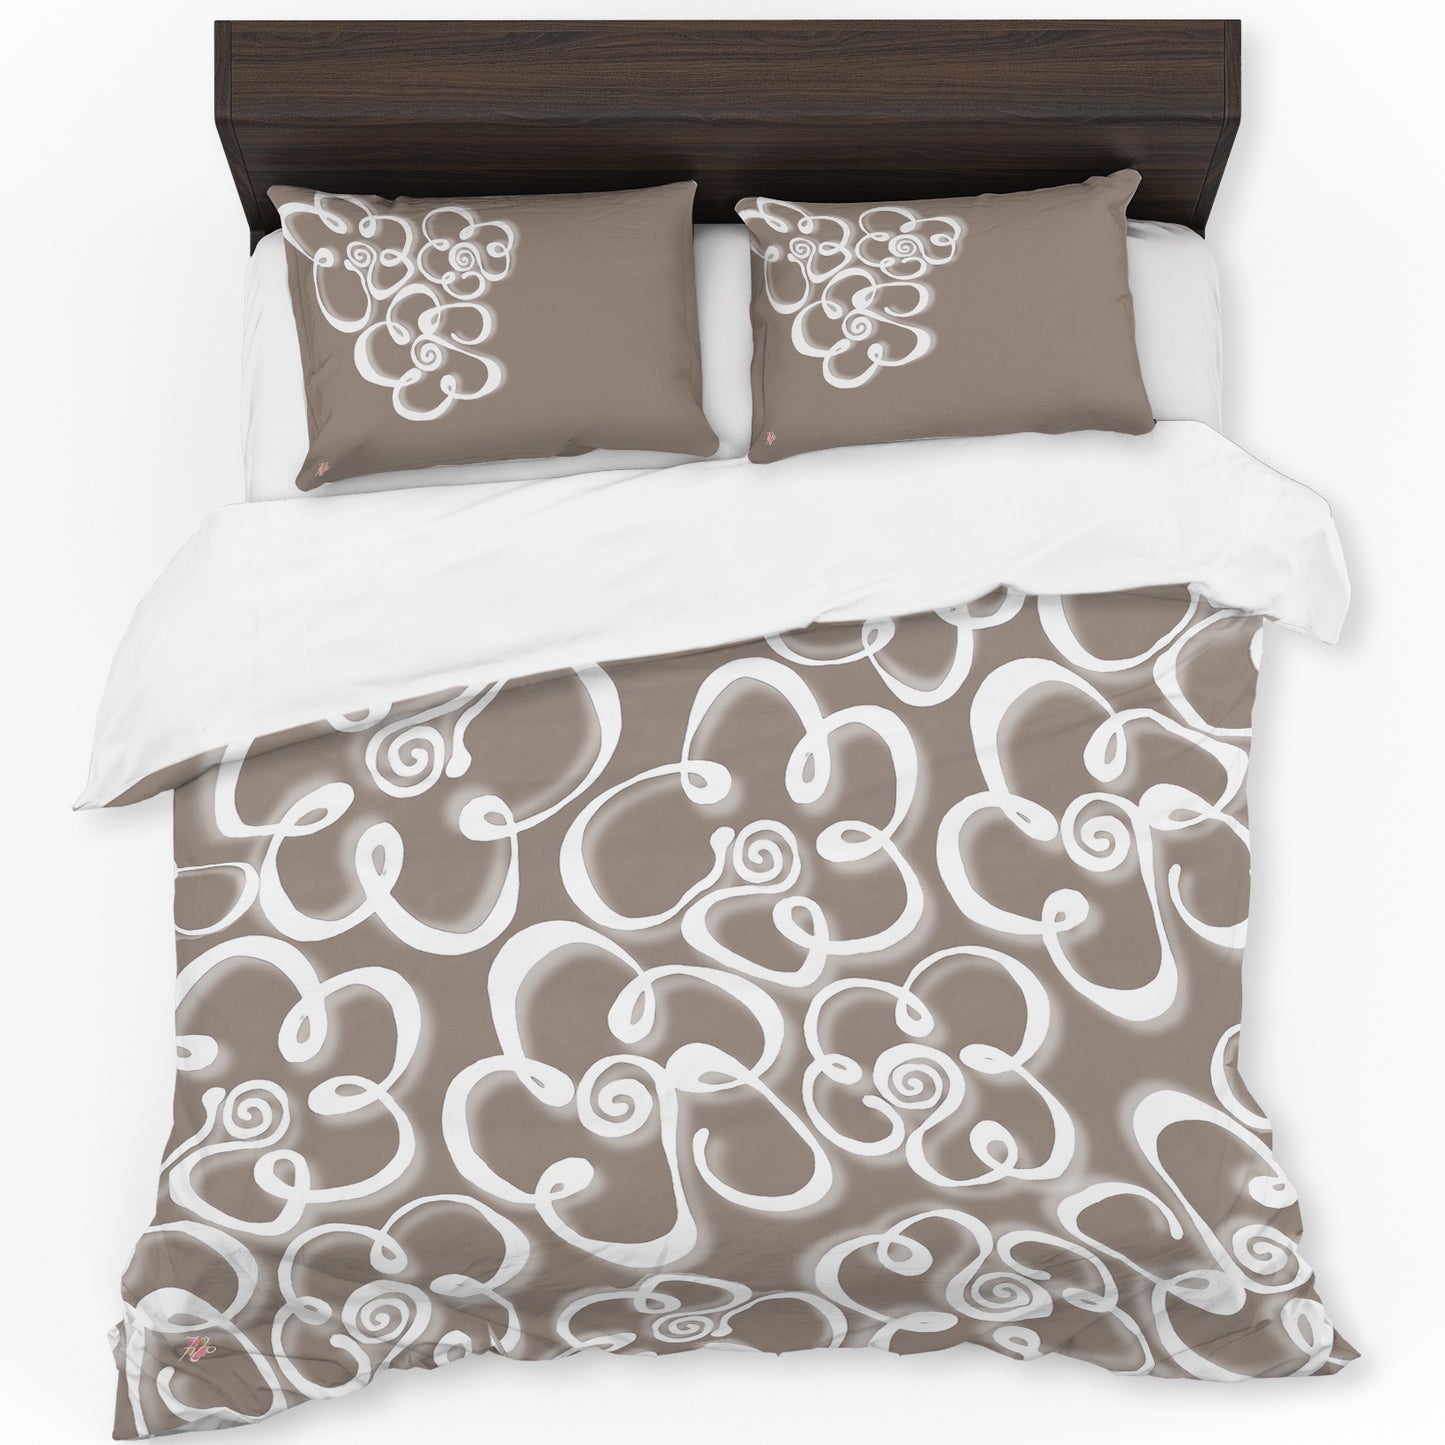 Daisies on Mocha Duvet Cover Set By Fifo